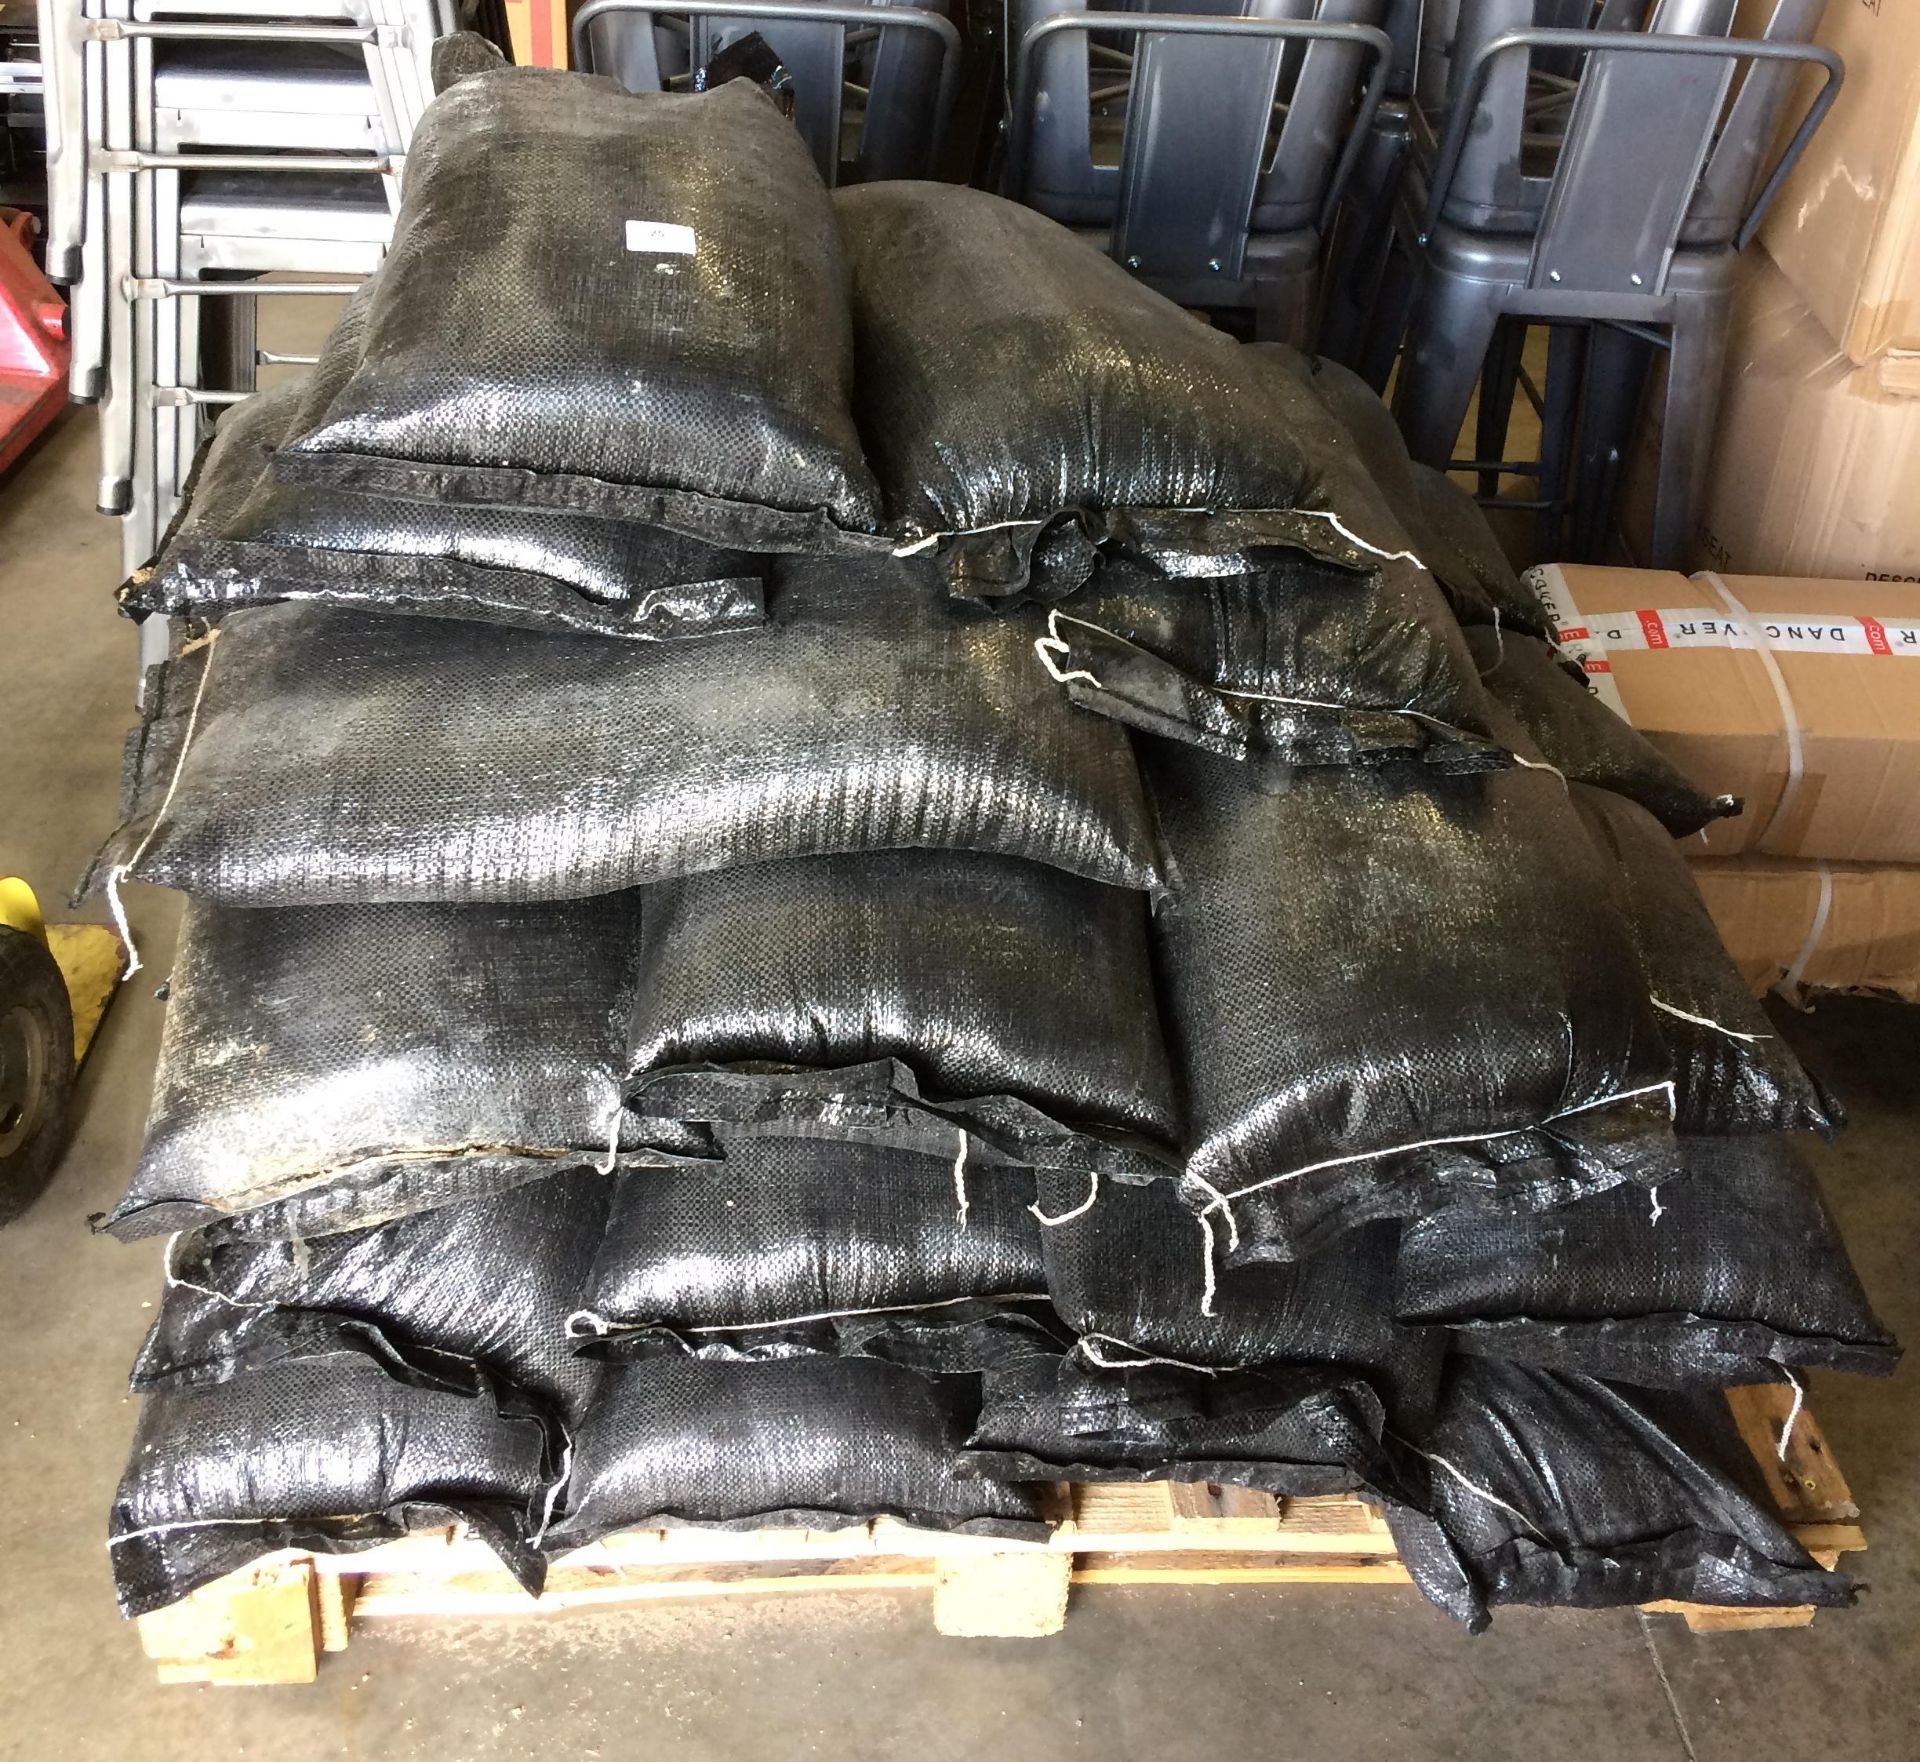 Contents to pallet - 32 sandbags